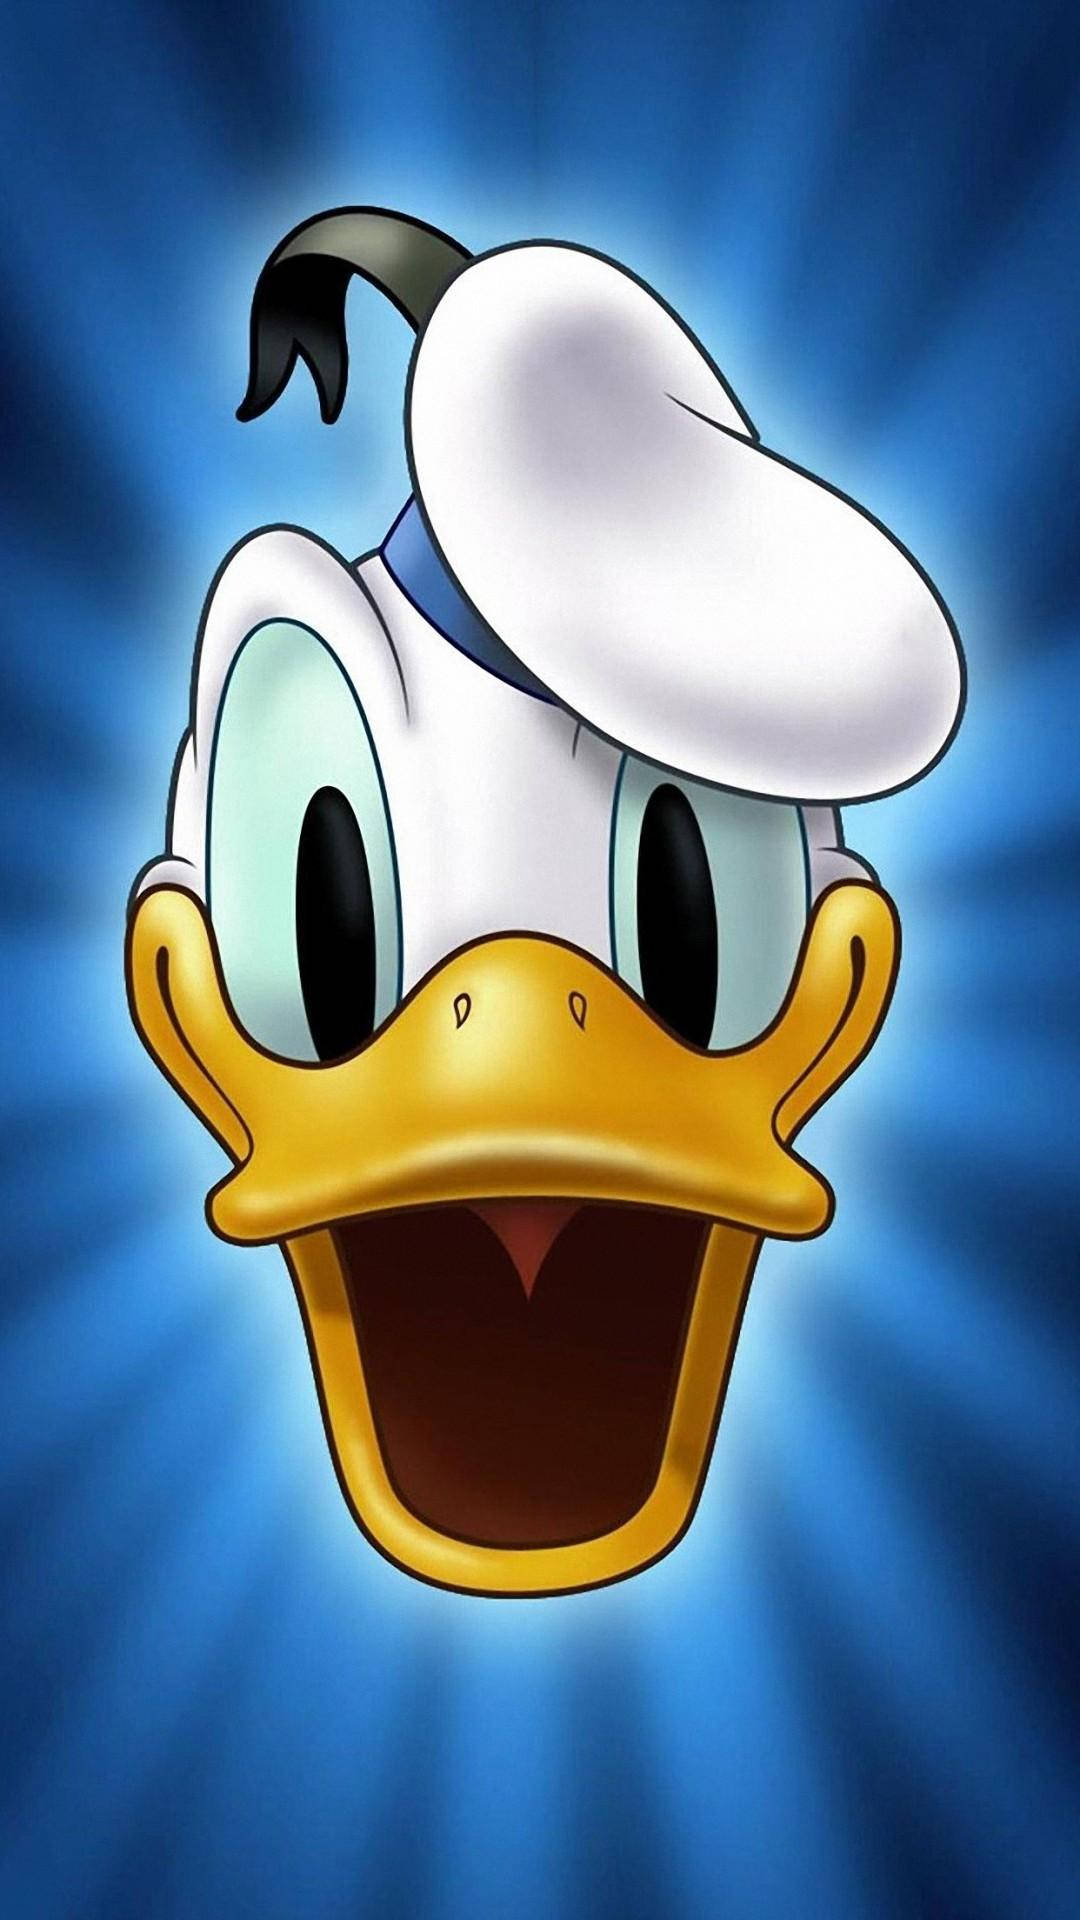 Full Hd Donald Duck Android Wallpaper